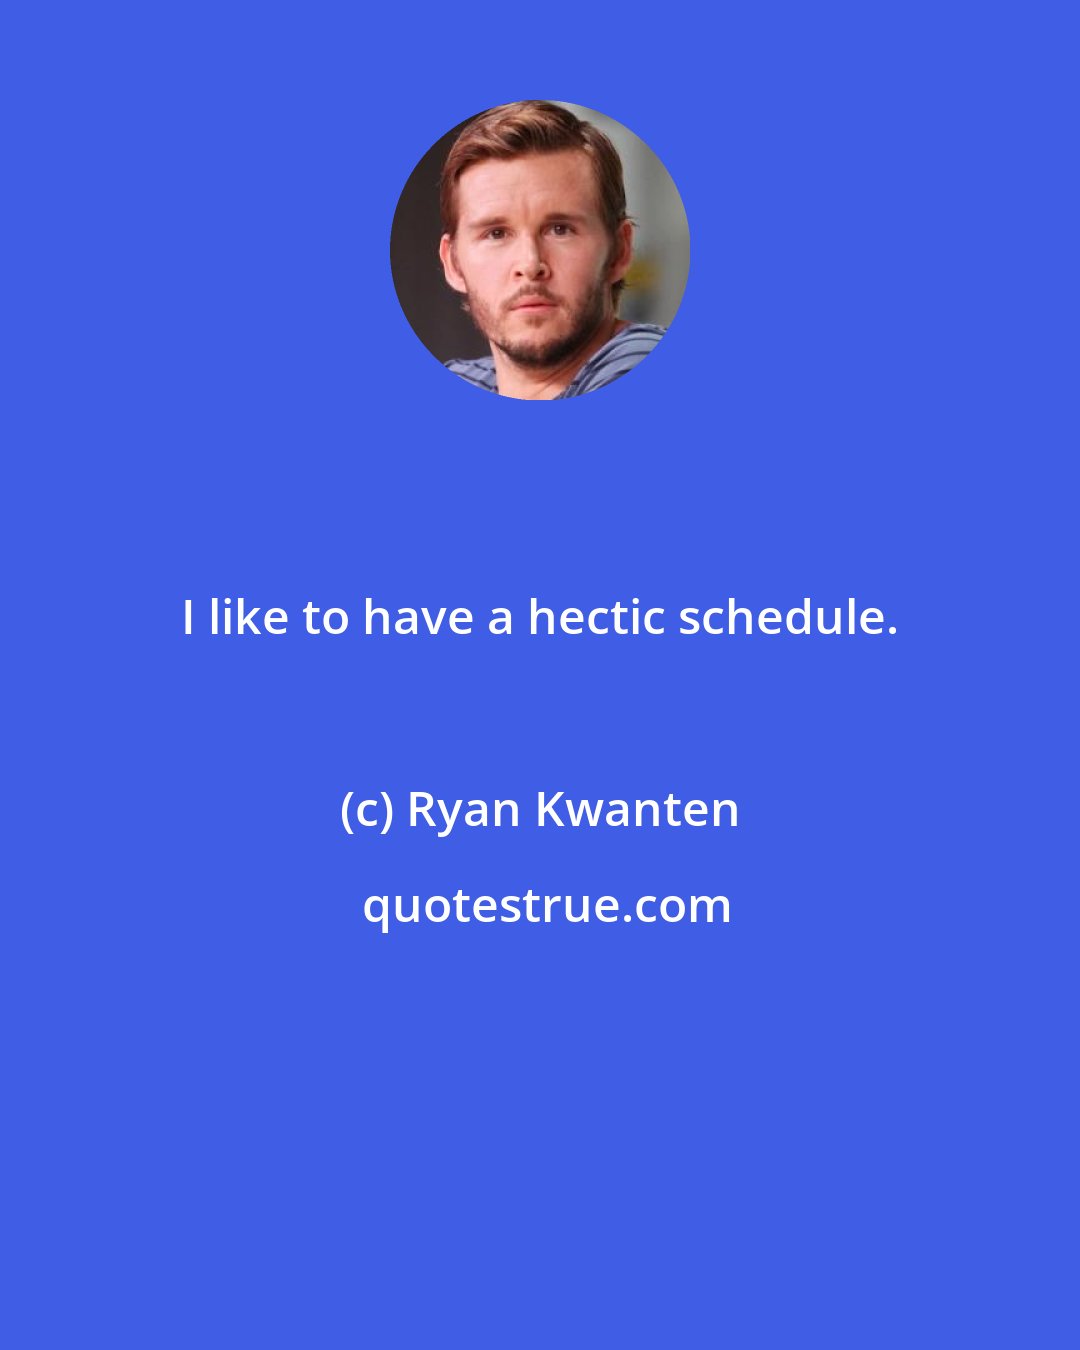 Ryan Kwanten: I like to have a hectic schedule.